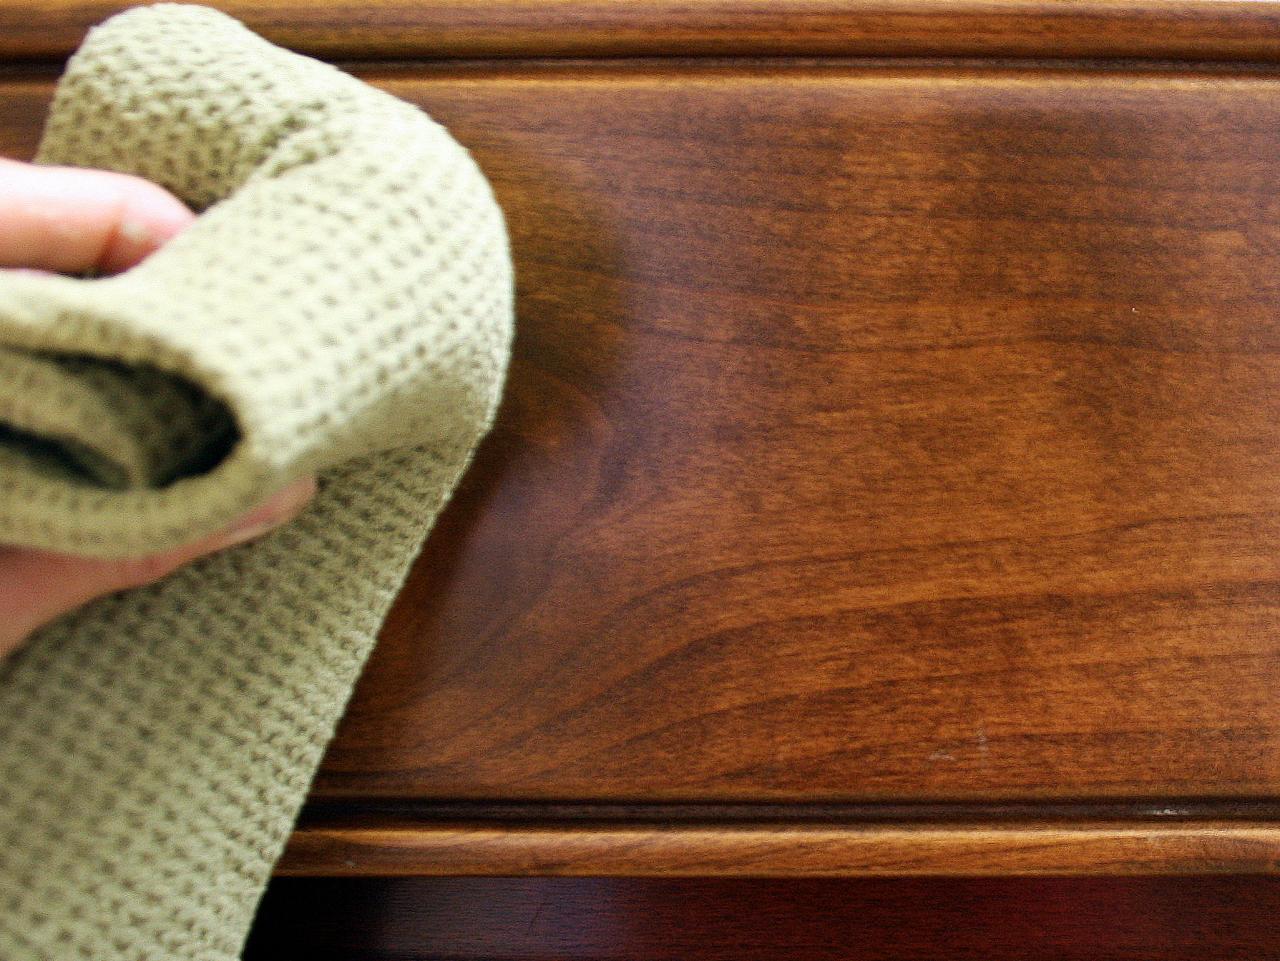 cleaning wooden kitchen table